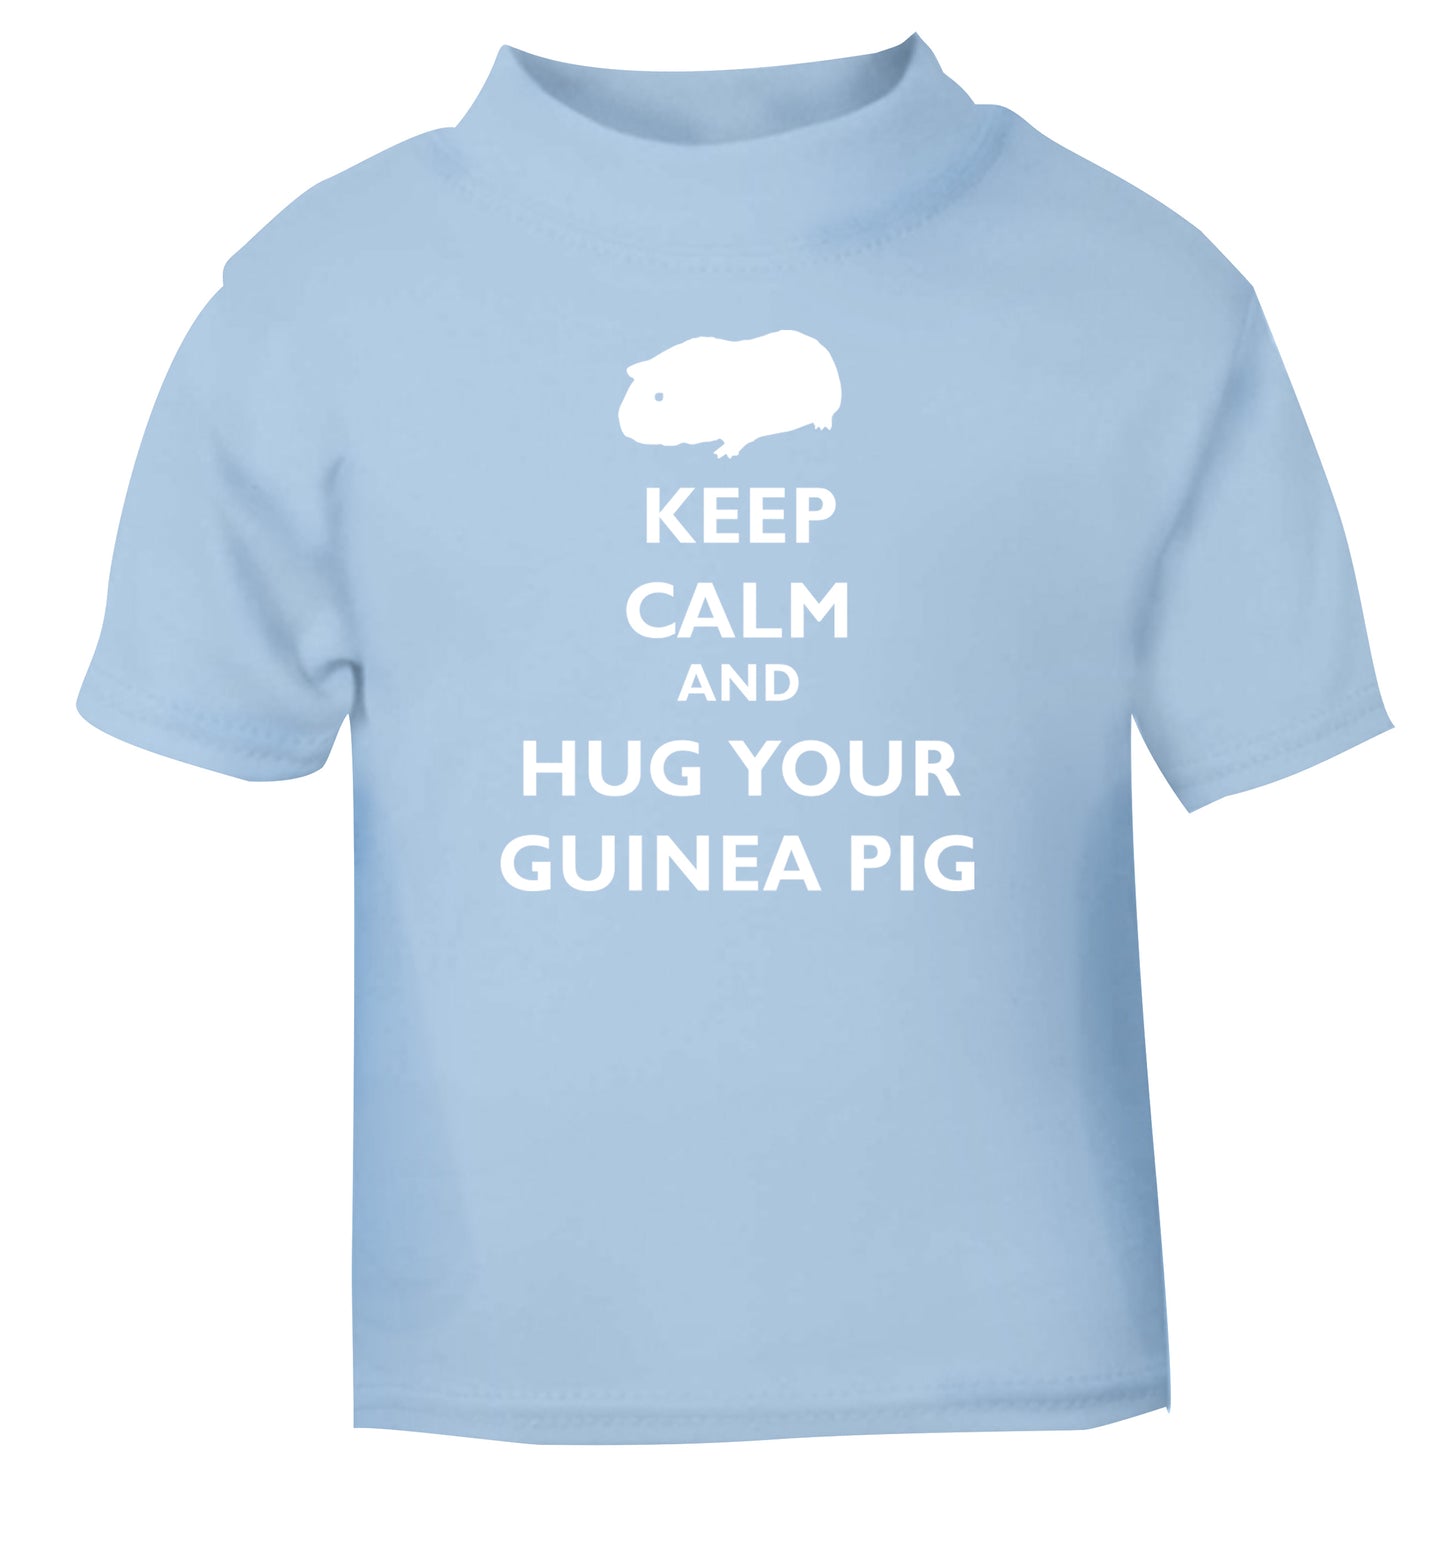 Keep calm and hug your guineapig light blue Baby Toddler Tshirt 2 Years